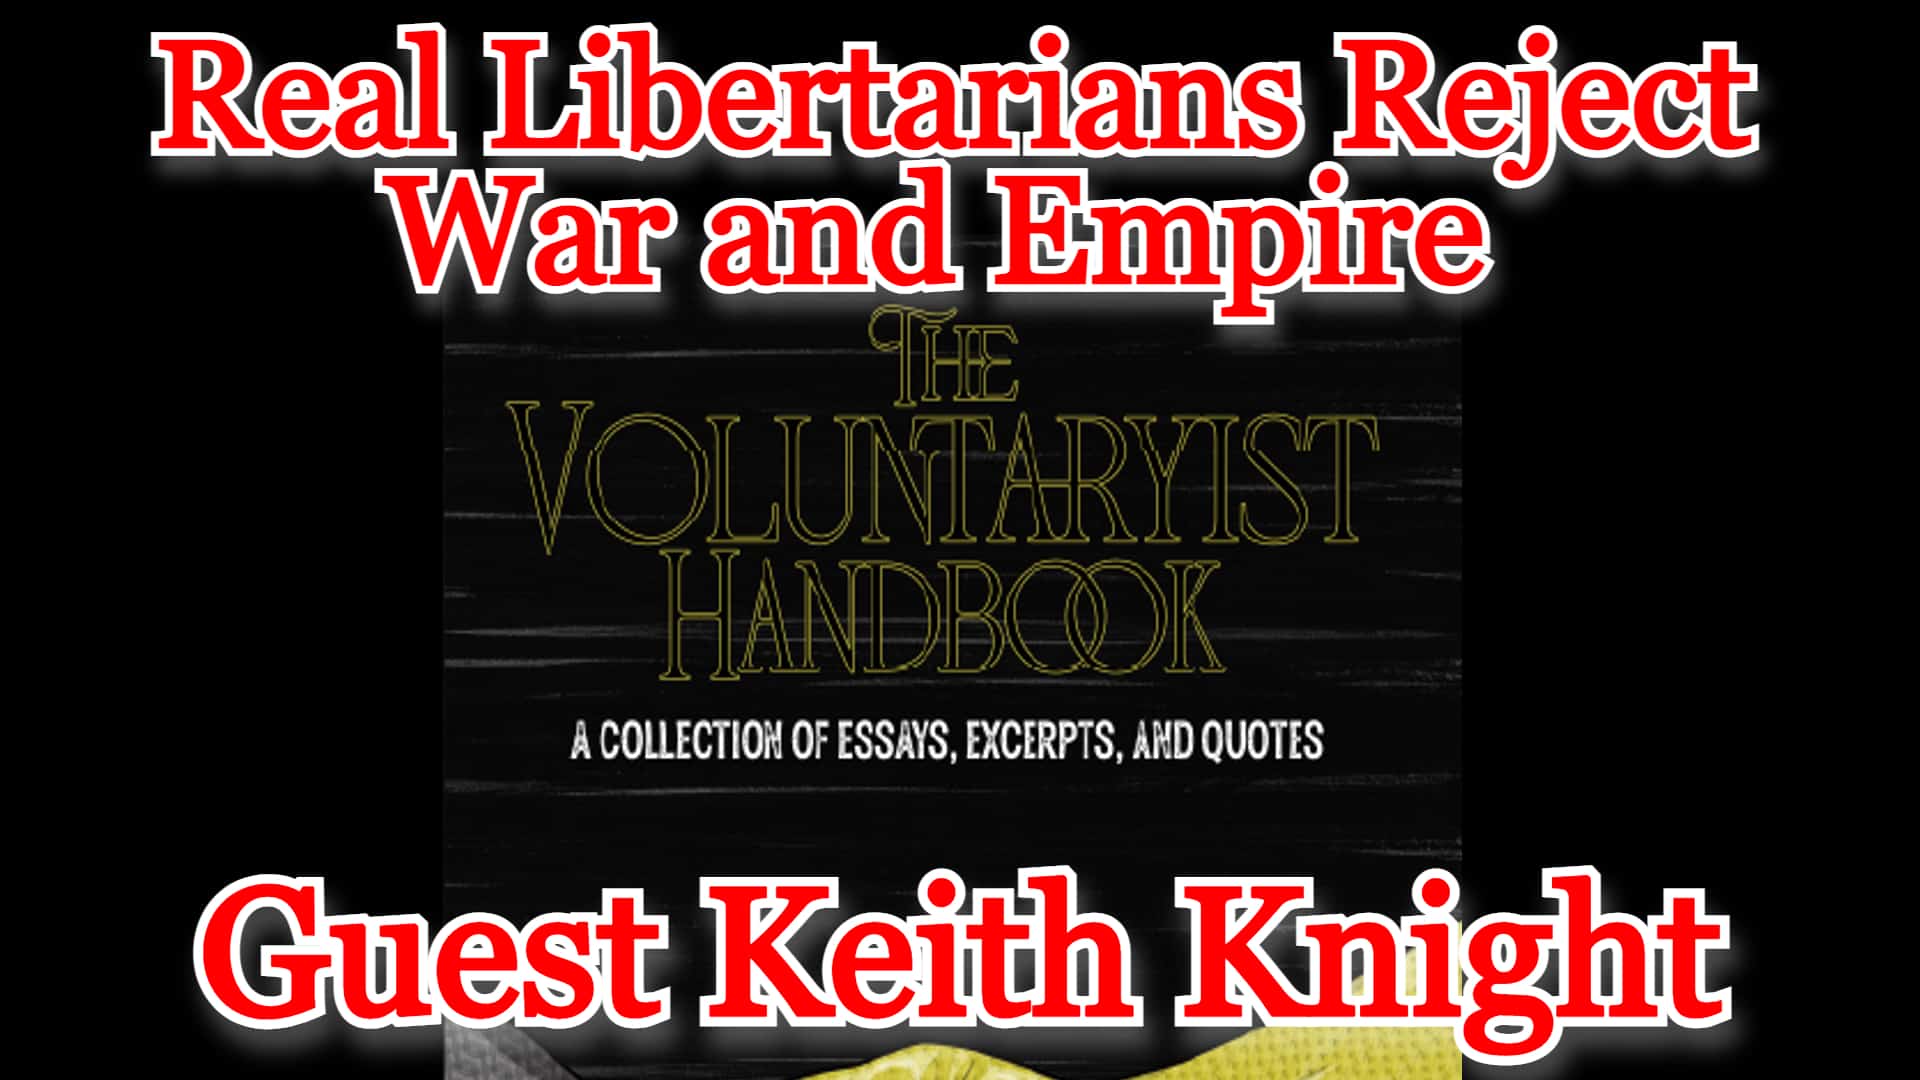 COI #306: Why Real Libertarians Reject War and Empire guest Keith Knight